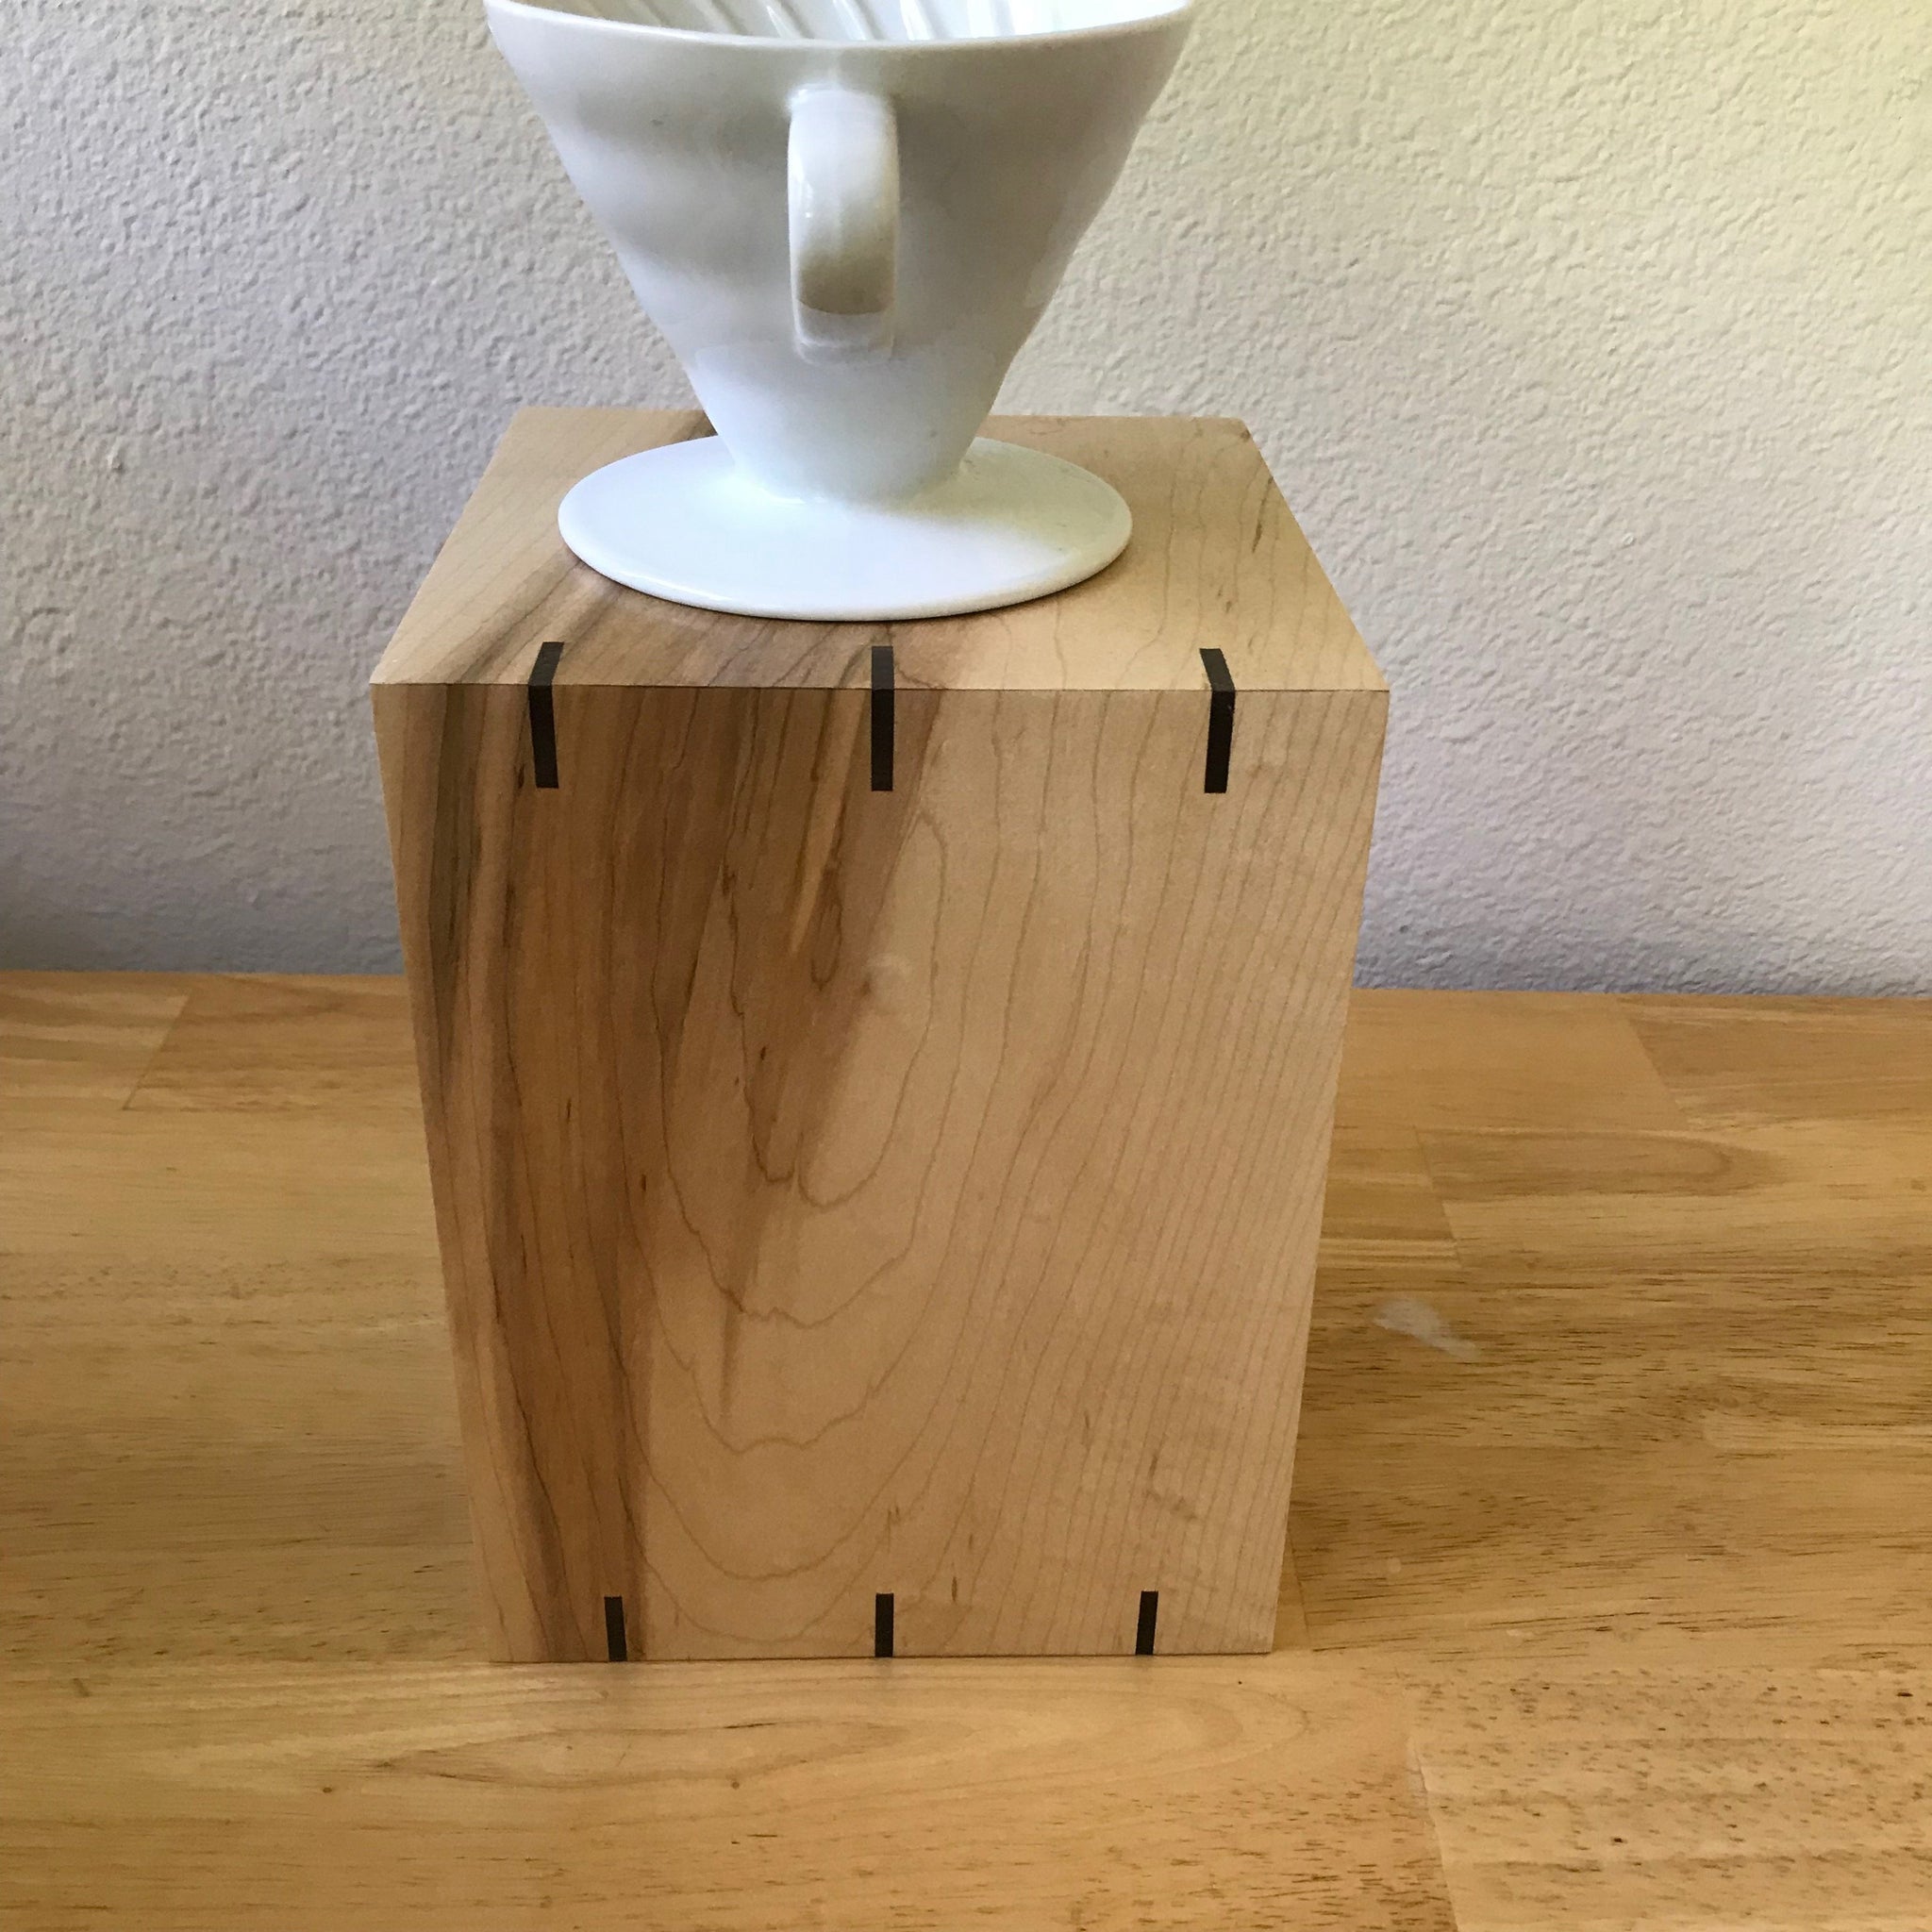 Coffee Pour Over Stand - Design #1